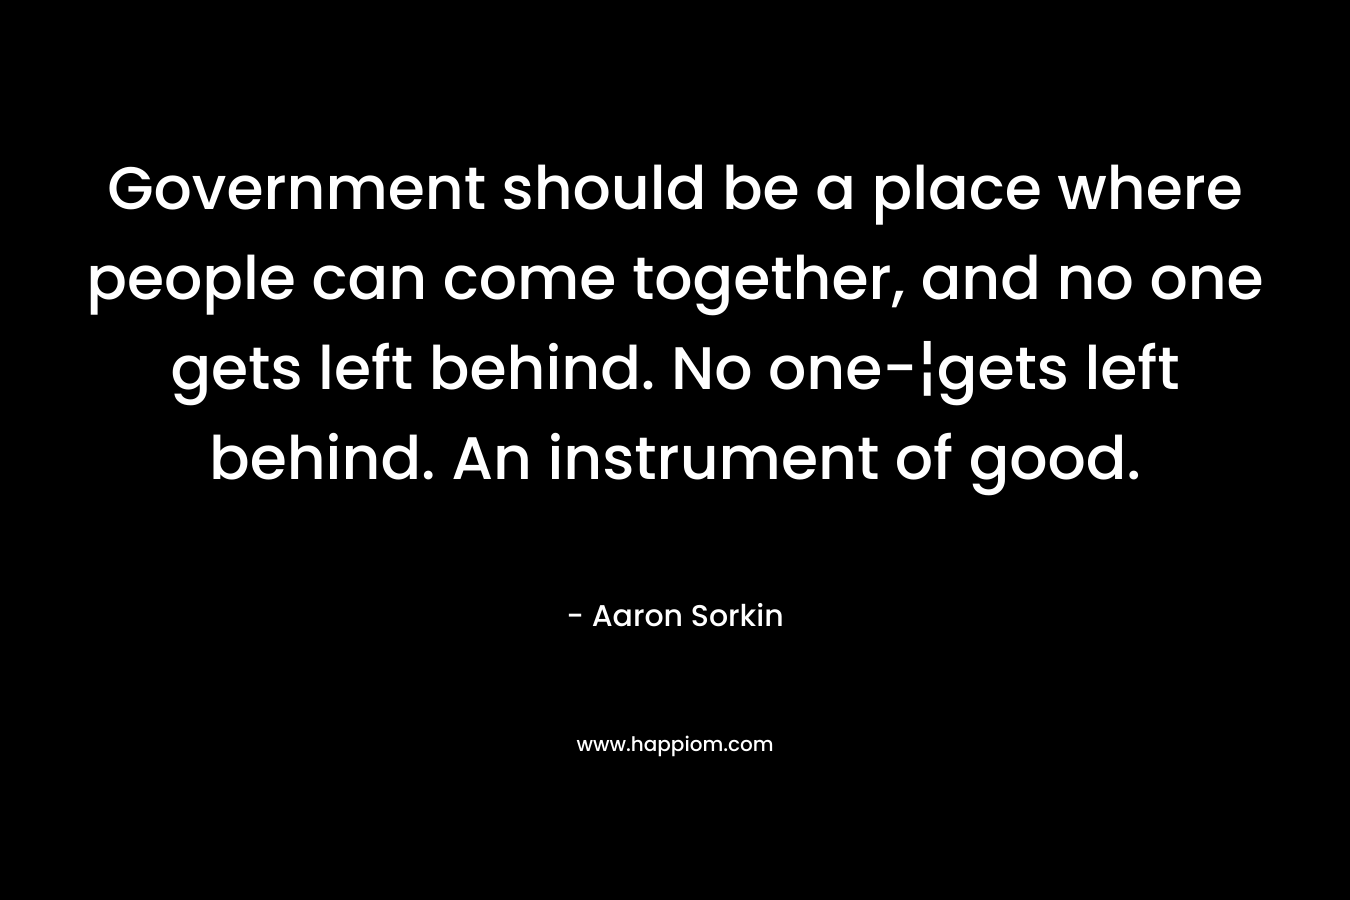 Government should be a place where people can come together, and no one gets left behind. No one-¦gets left behind. An instrument of good.